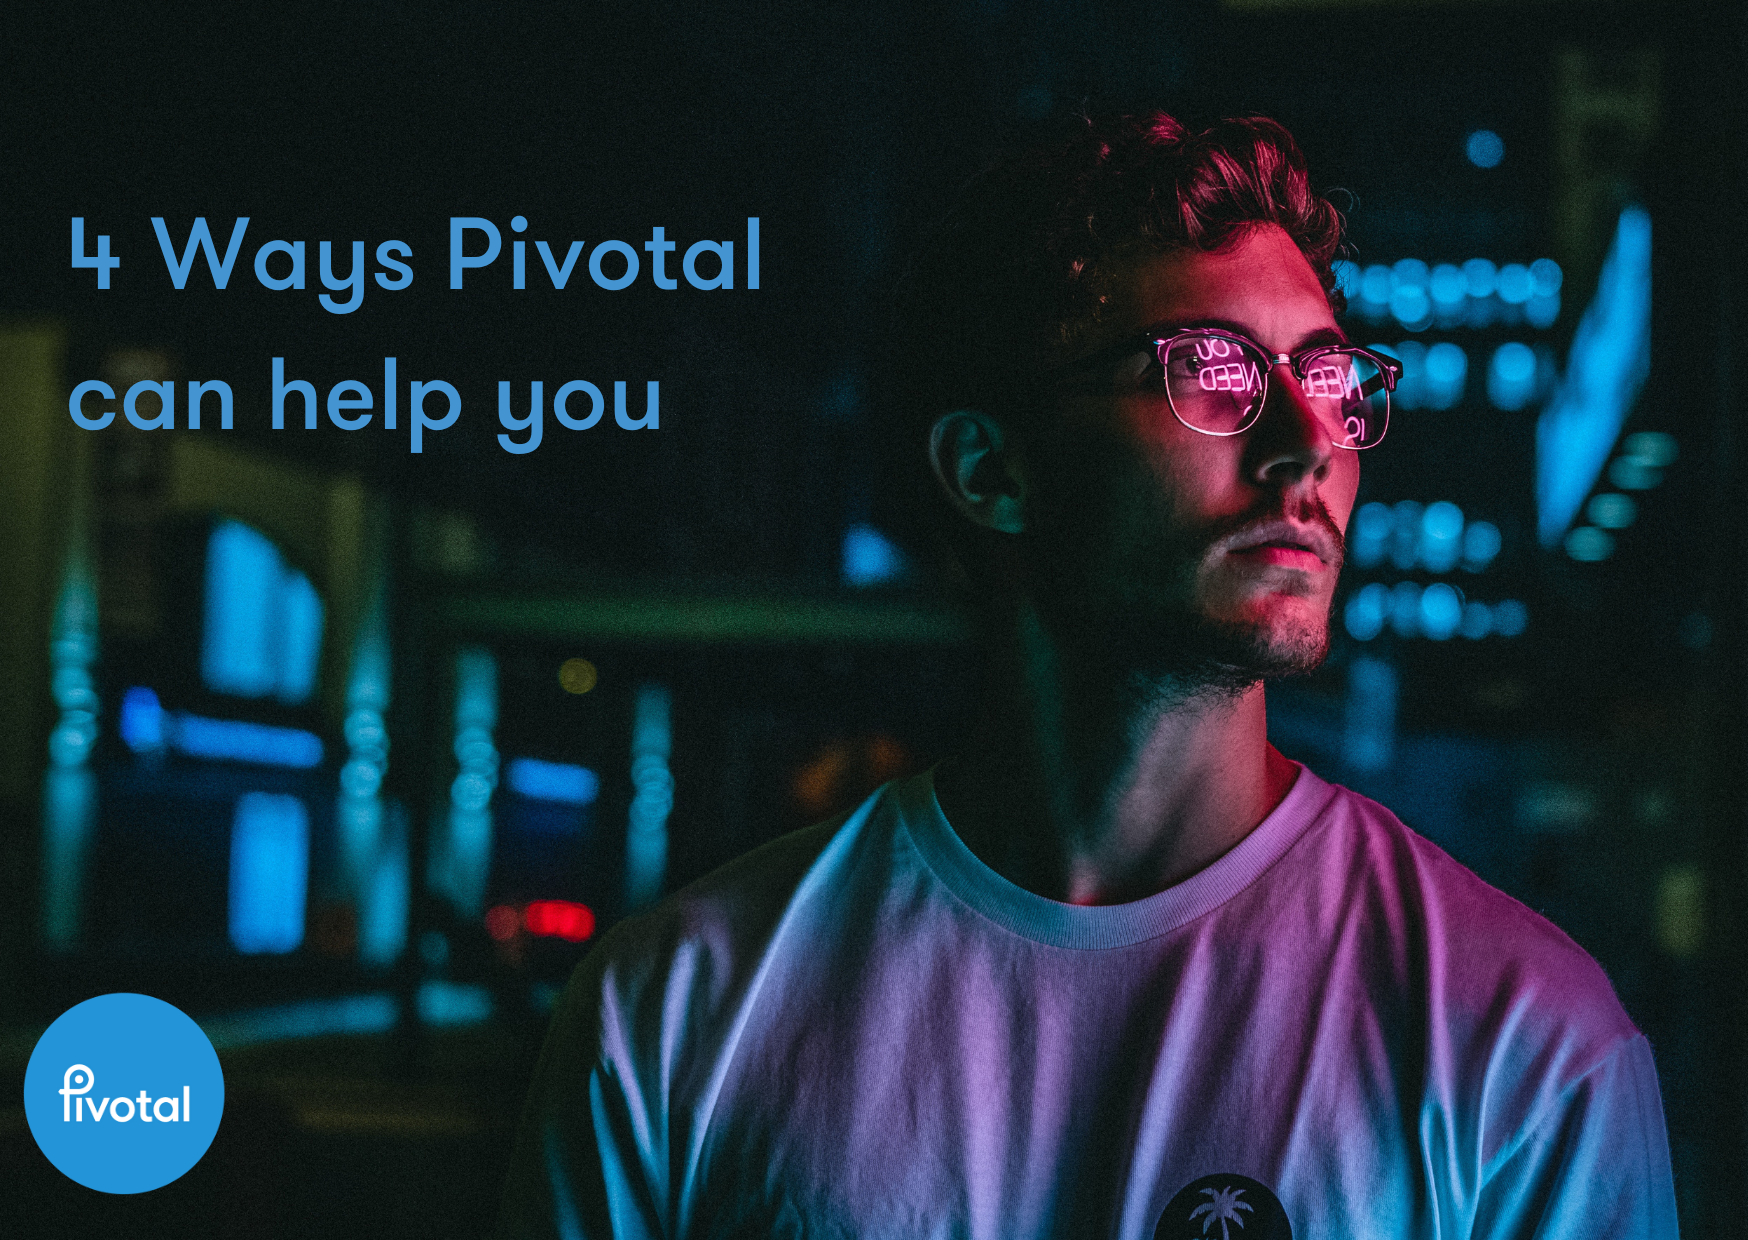 4 Ways Pivotal can help you